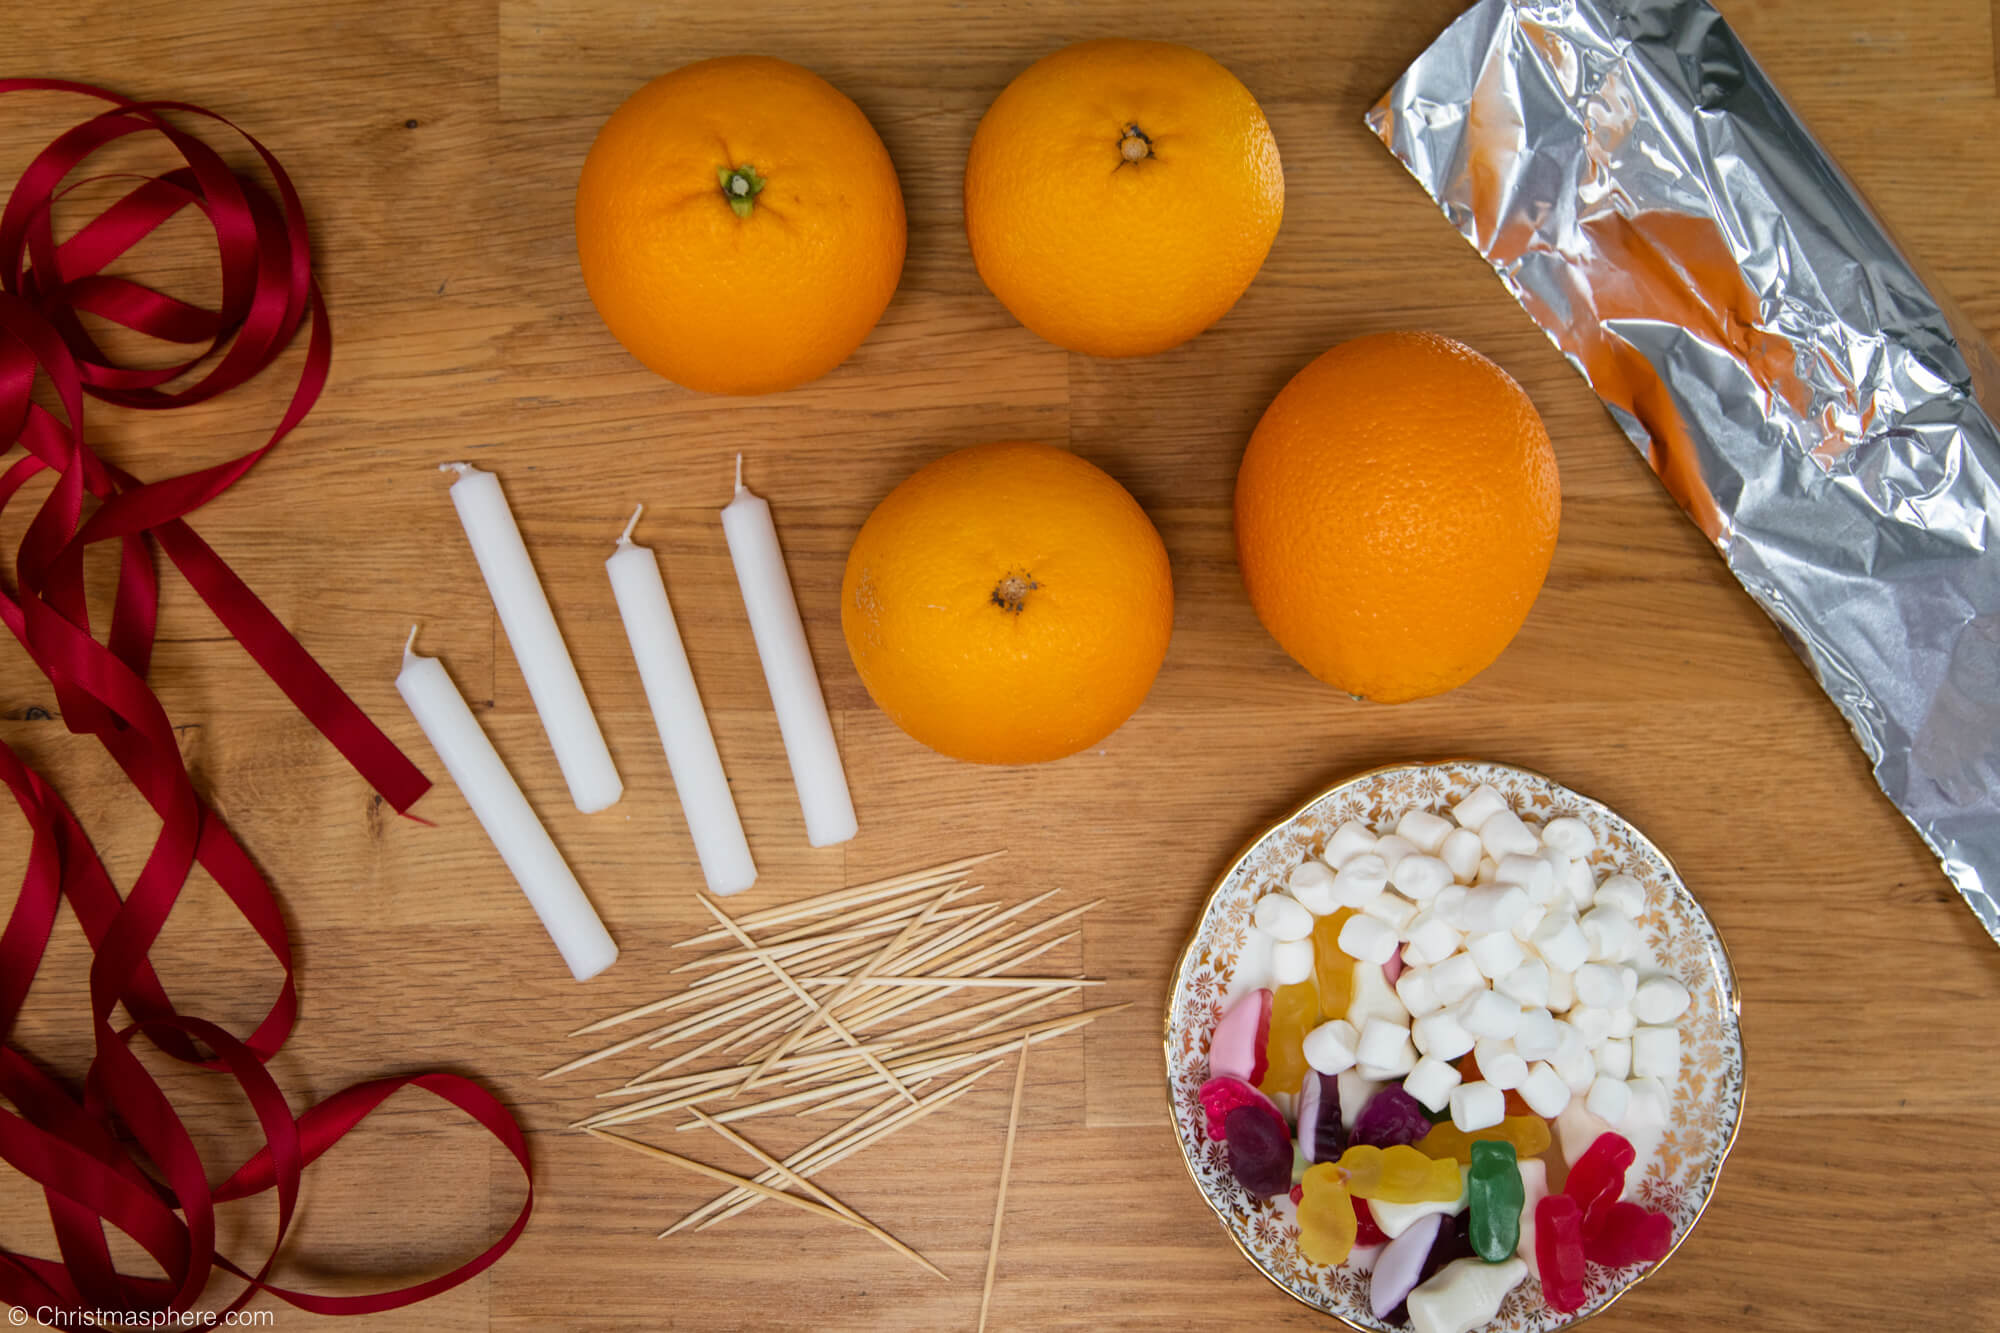 red ribbon, white candles, oranges, plate of sweets, tin foil, cocktail sticks